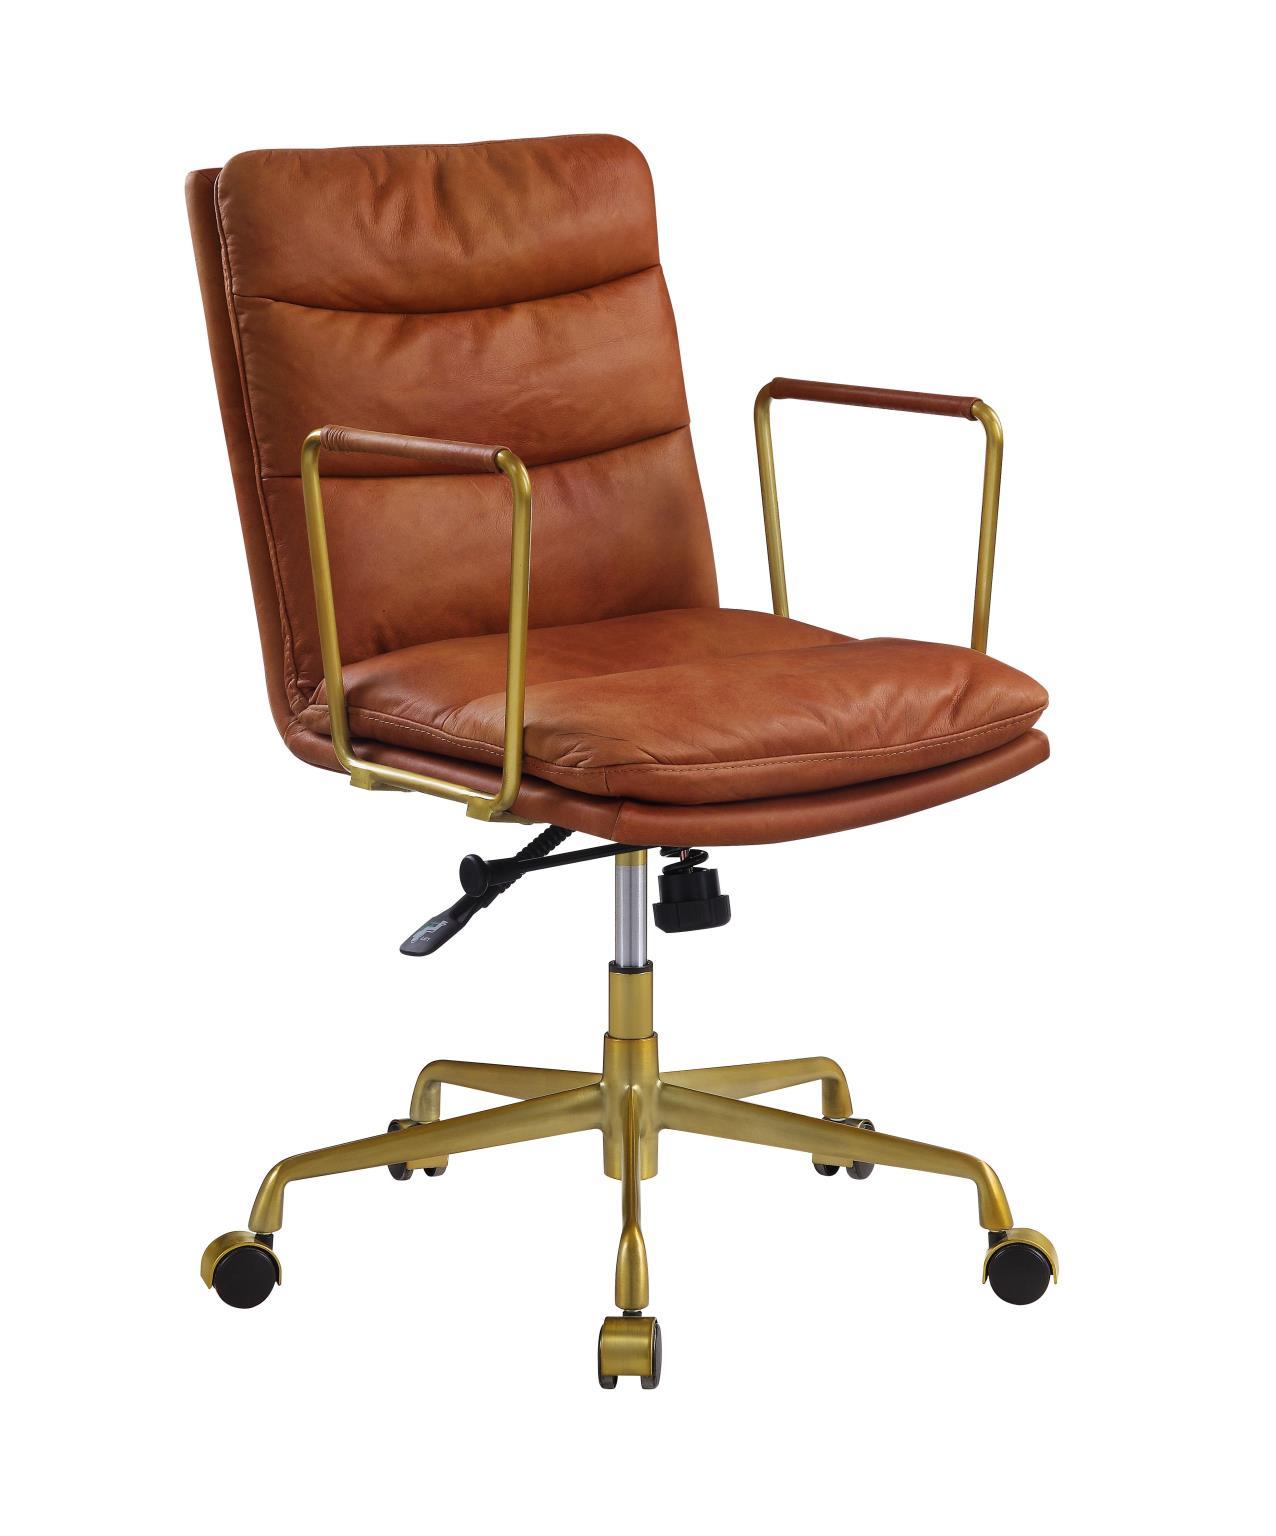 

    
Home Office Executive Chair Rust Top Grain Leather Dudley 92498 Acme Industrial
